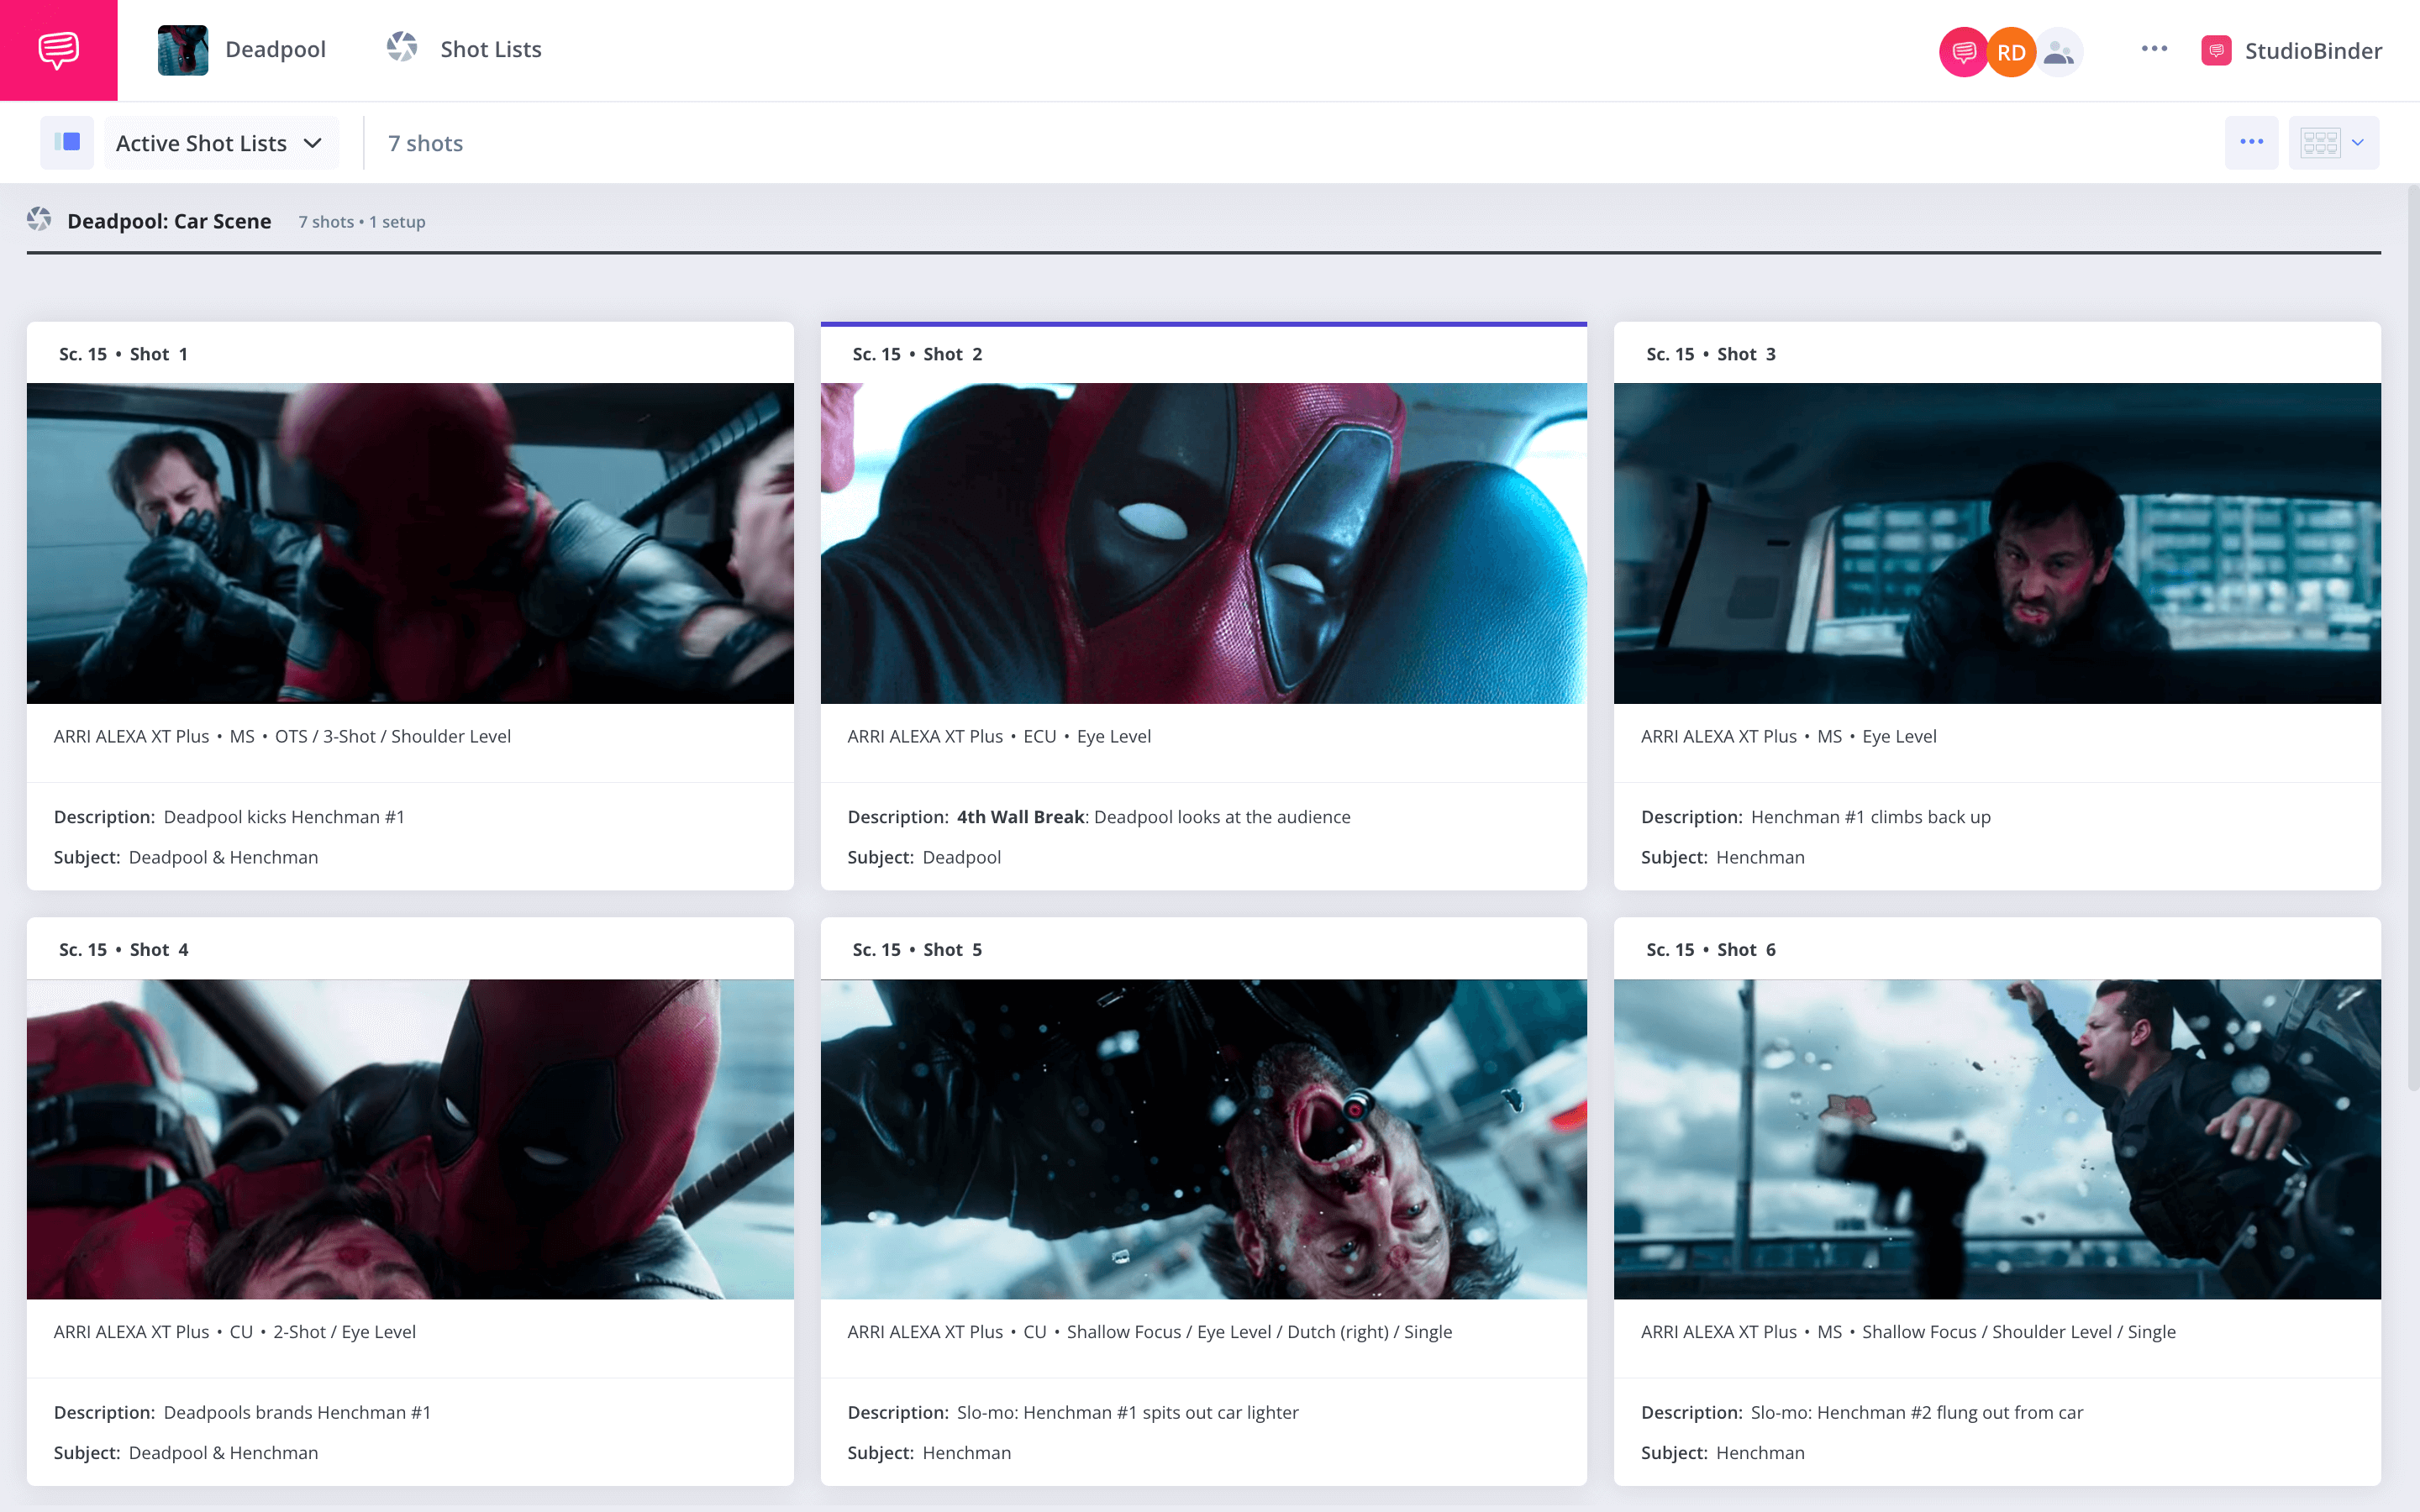 Best Cinematography Techniques Deadpool Car Chase Sequence StudioBinder Shot Listing Software